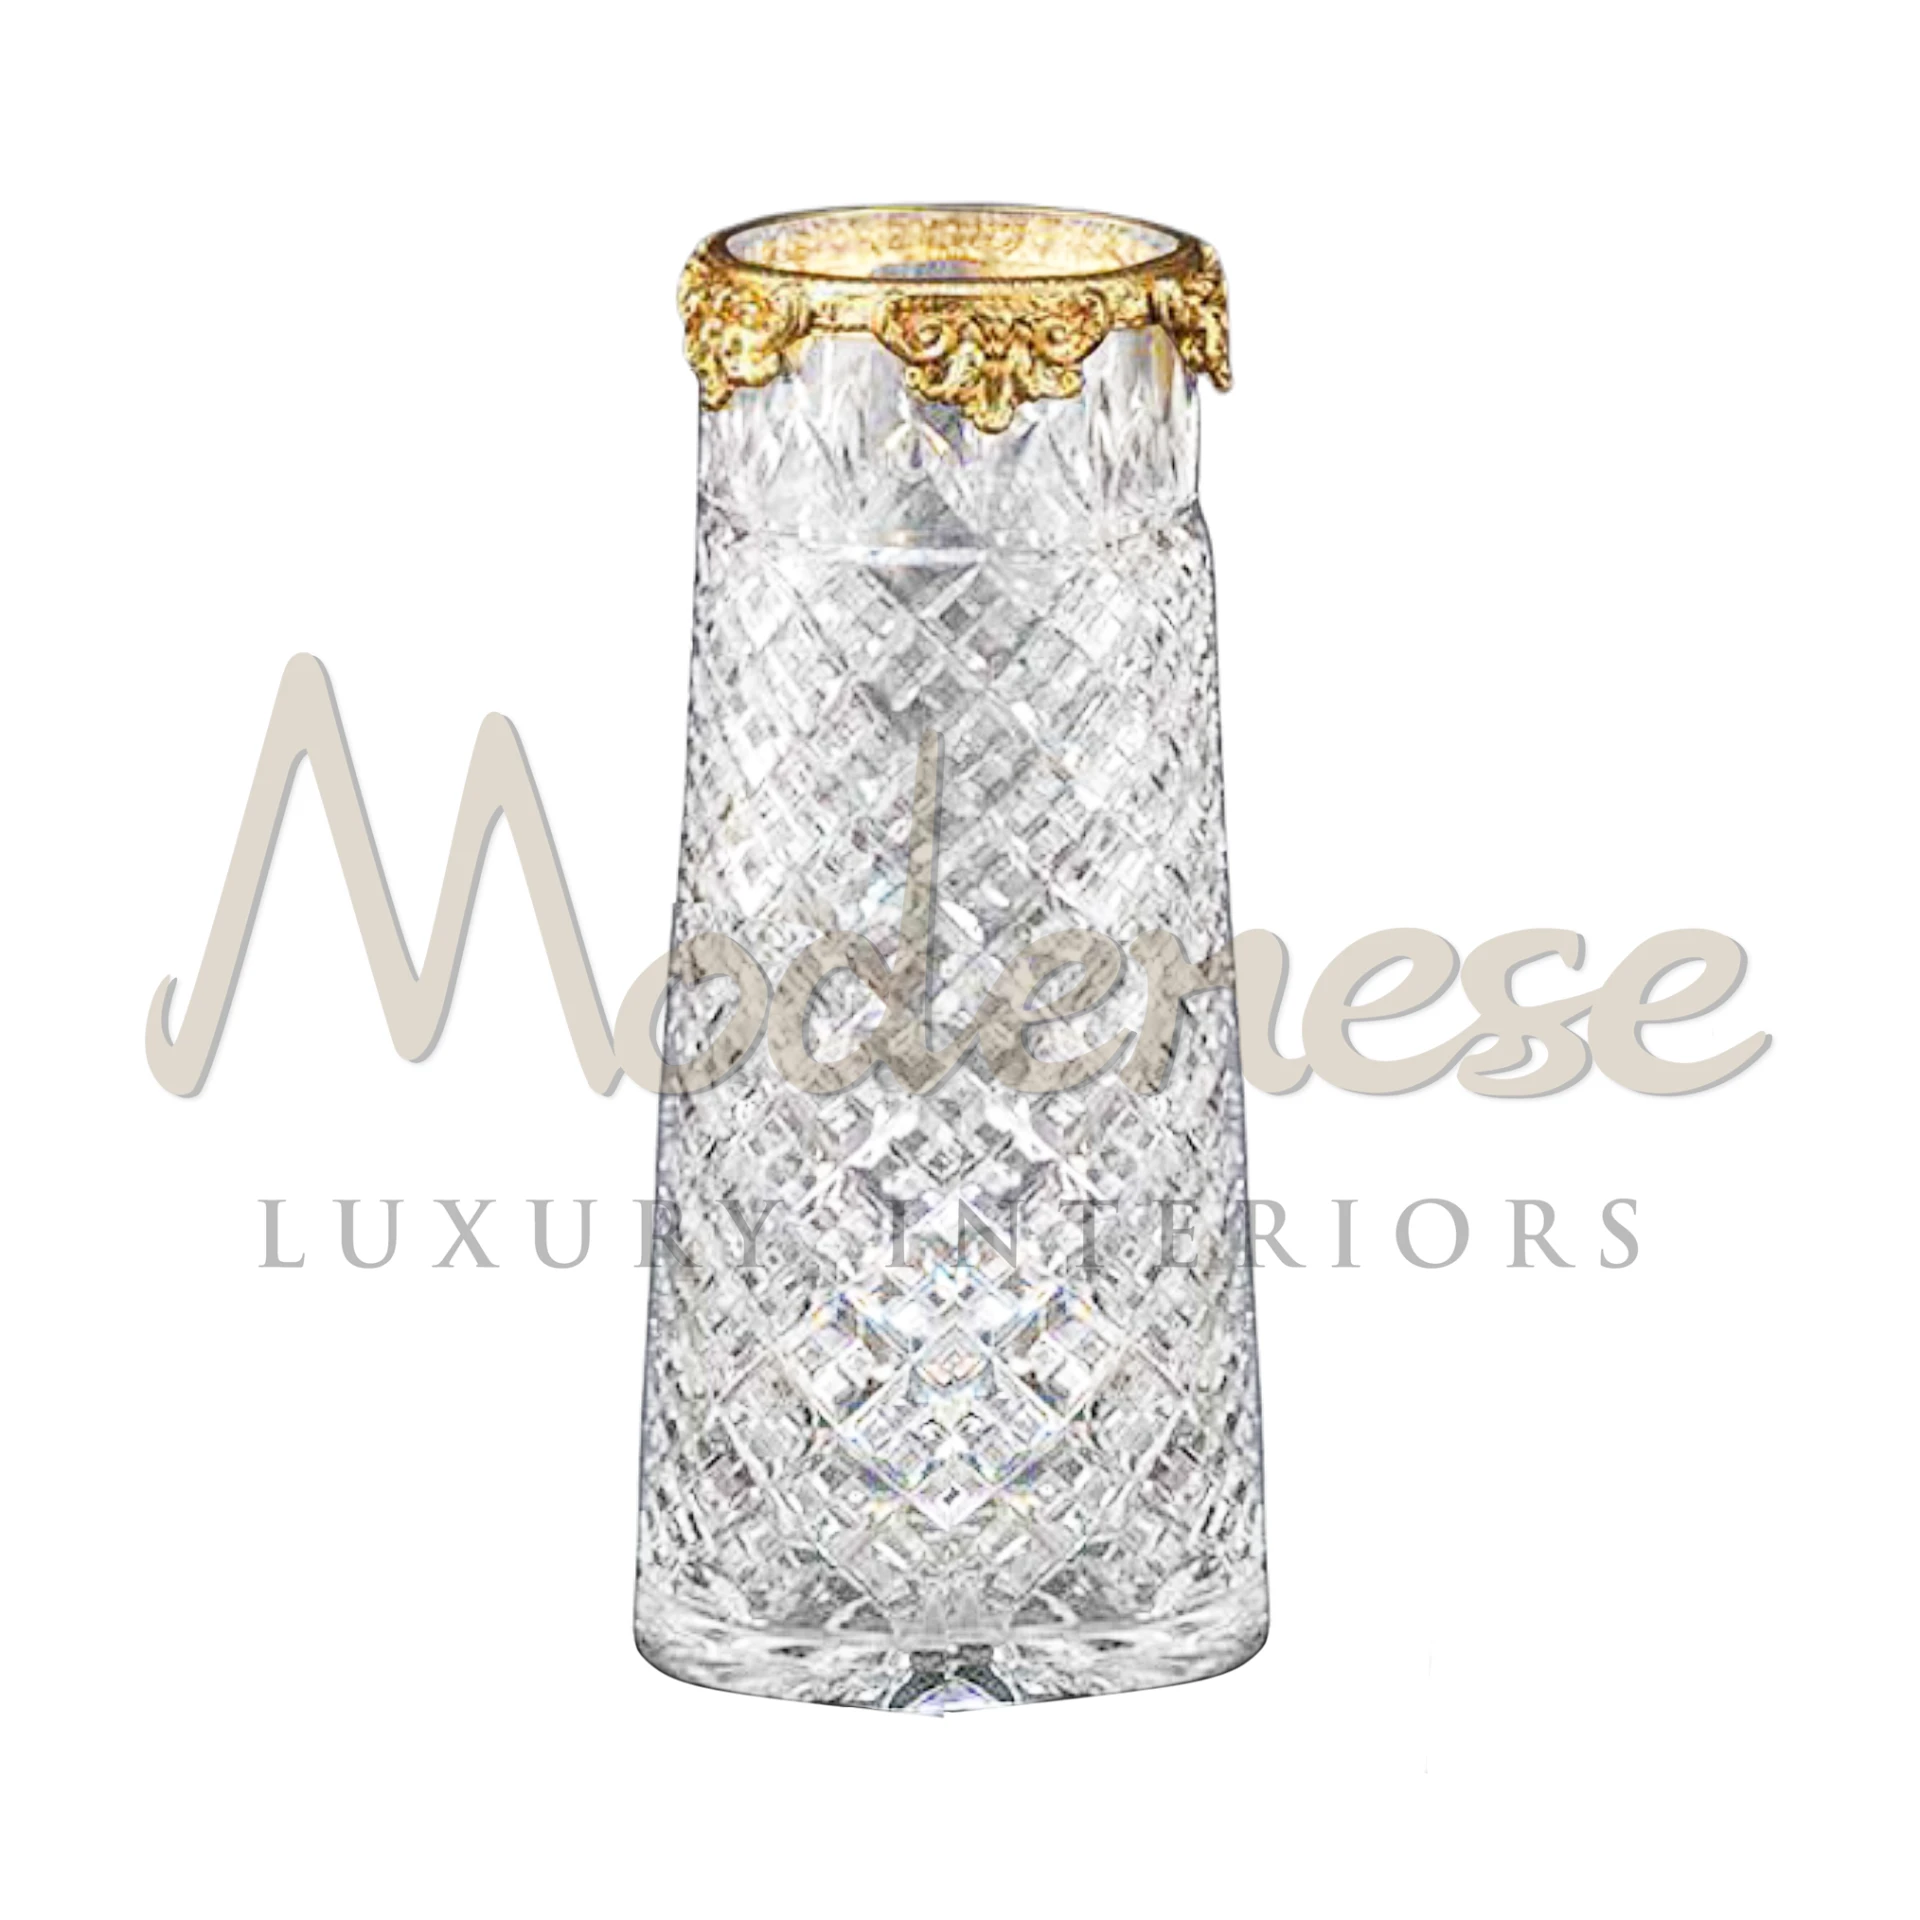 Victorian Tall Glass Vase, featuring intricate patterns, a treasure for collectors, blends classic and baroque elegance in luxury interior design.